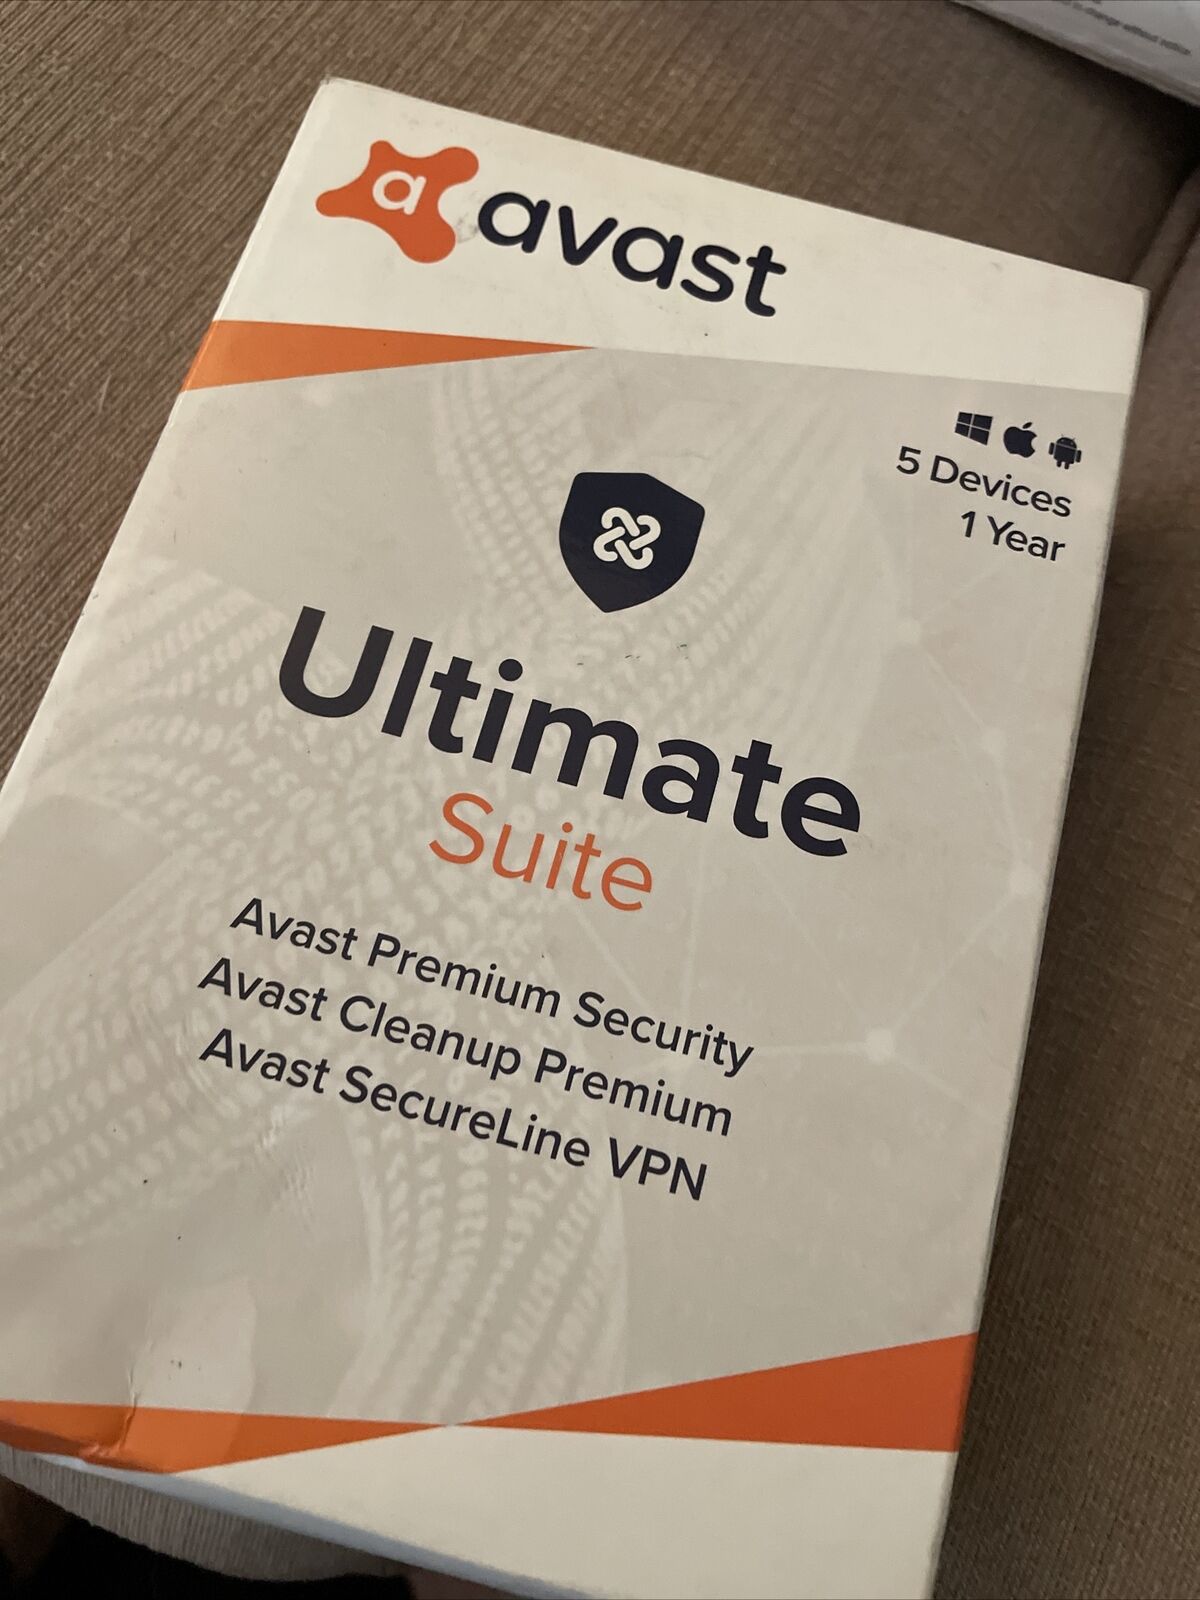 NEW Avast Ultimate Suite (3 Software for any 5 Devices, 1 Year)